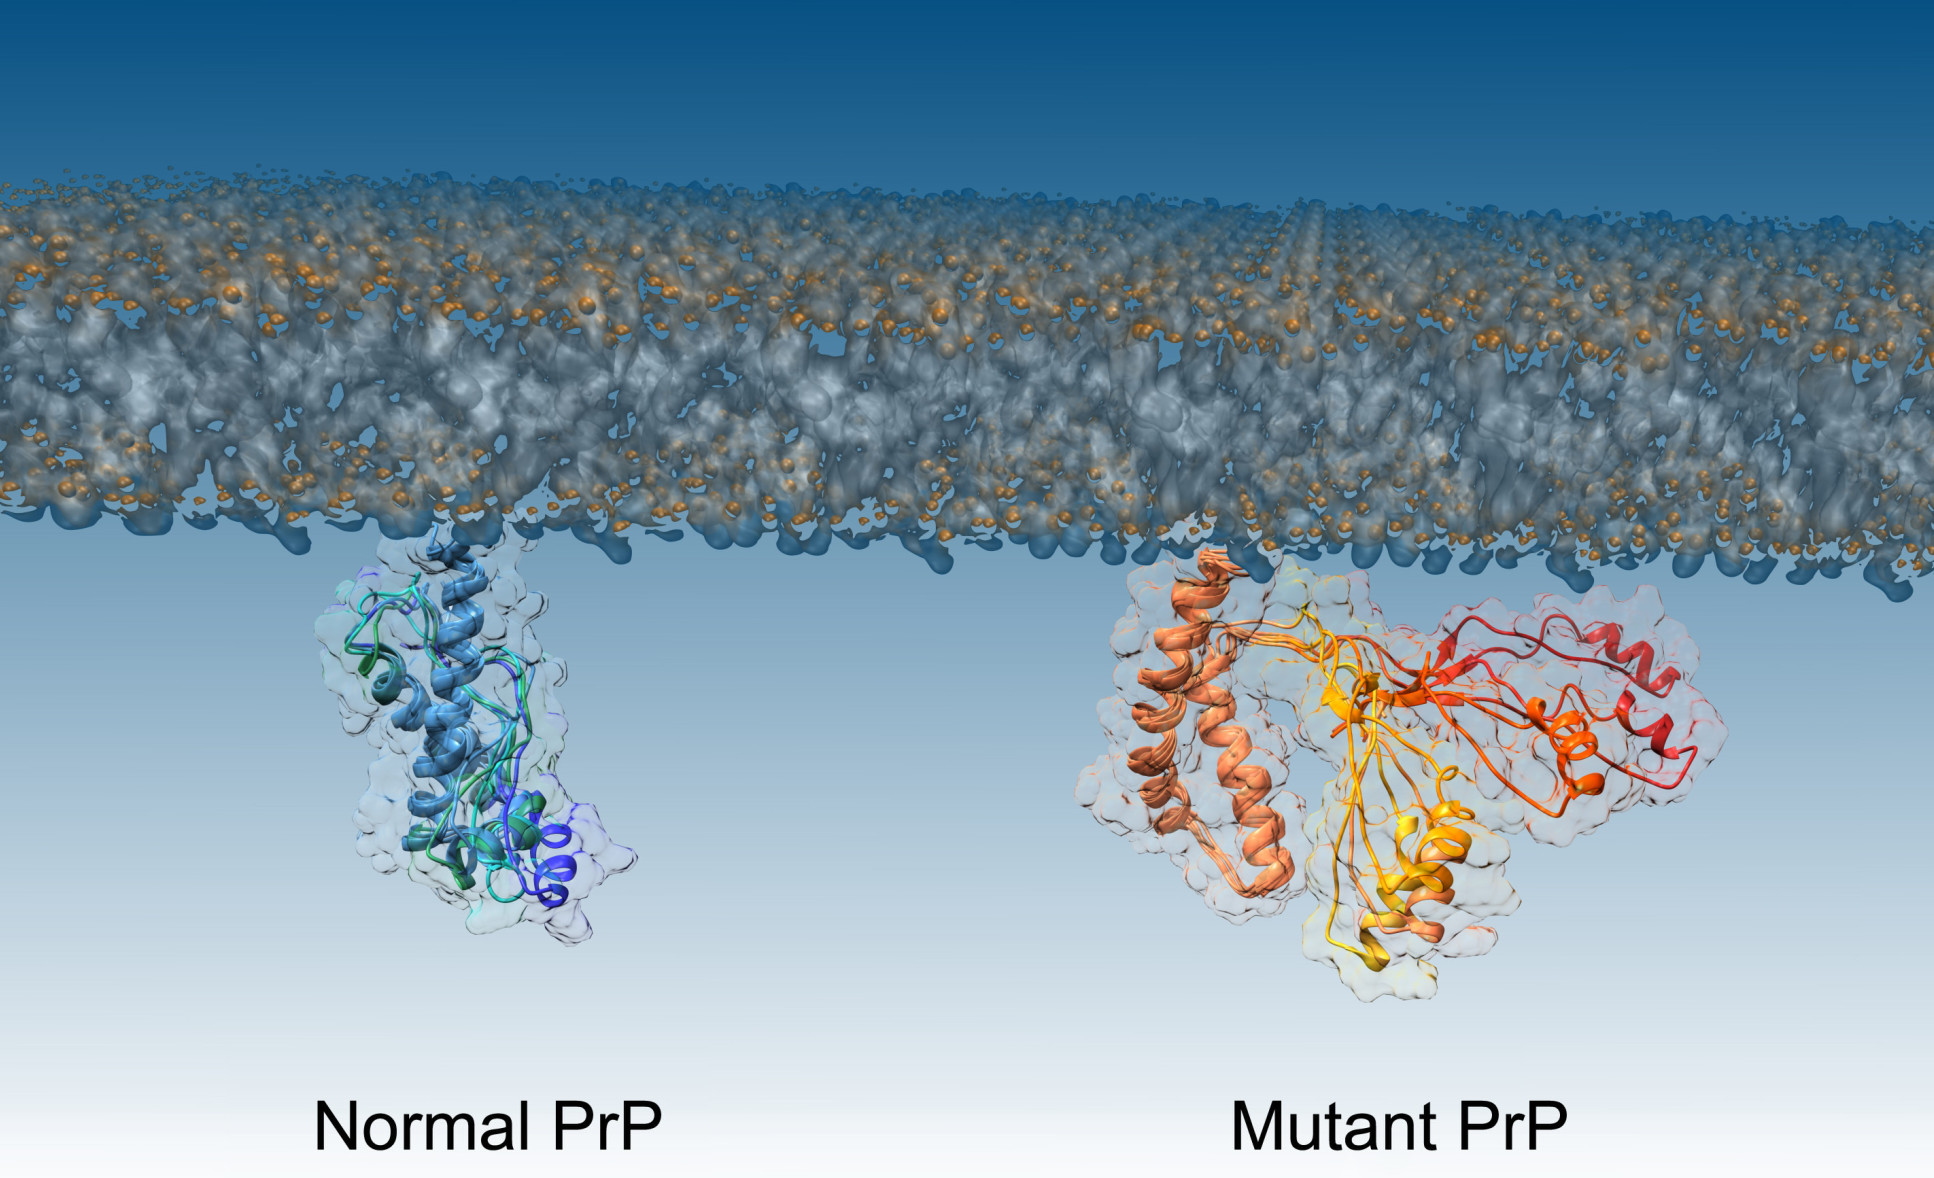 Illustration the molecular structure of normal PrP and mutatnt PrP proteins